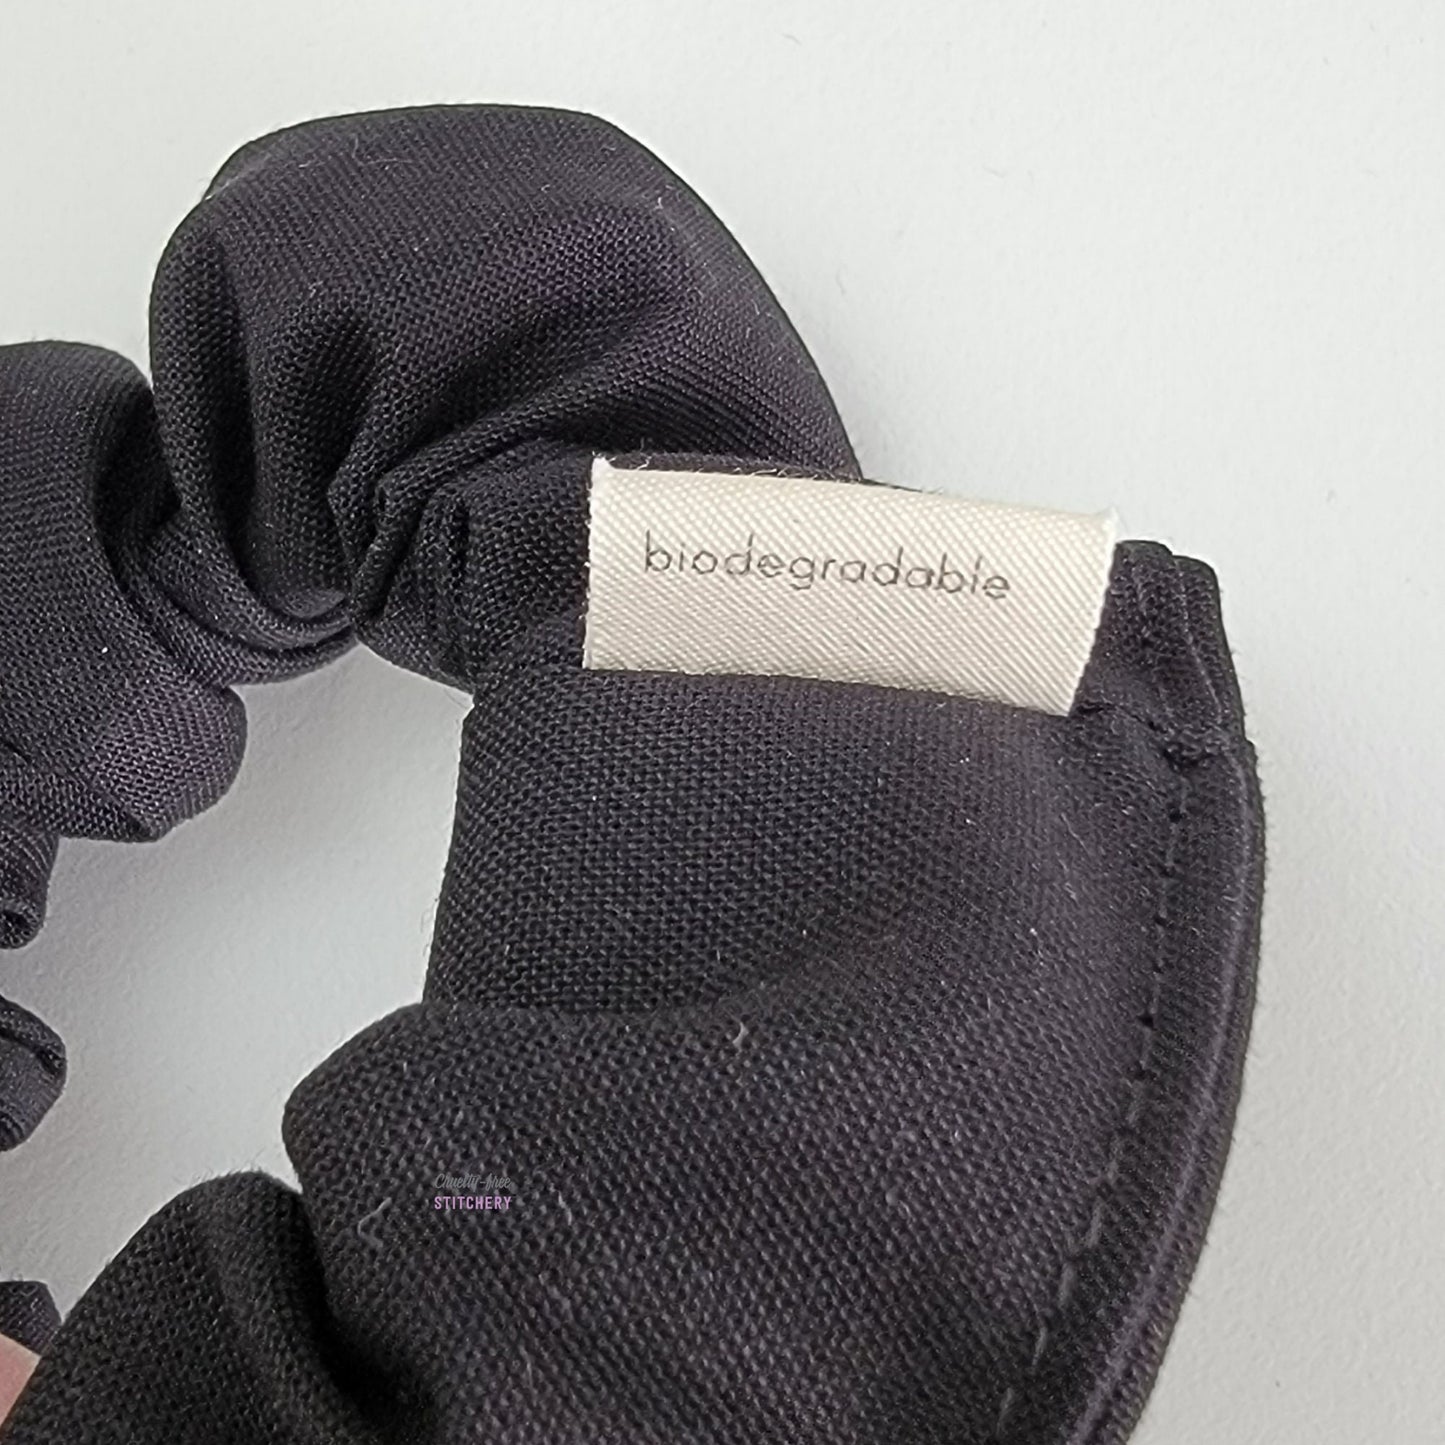 Close-up of the scrunchie, the back of the small white tag says "biodegradable".